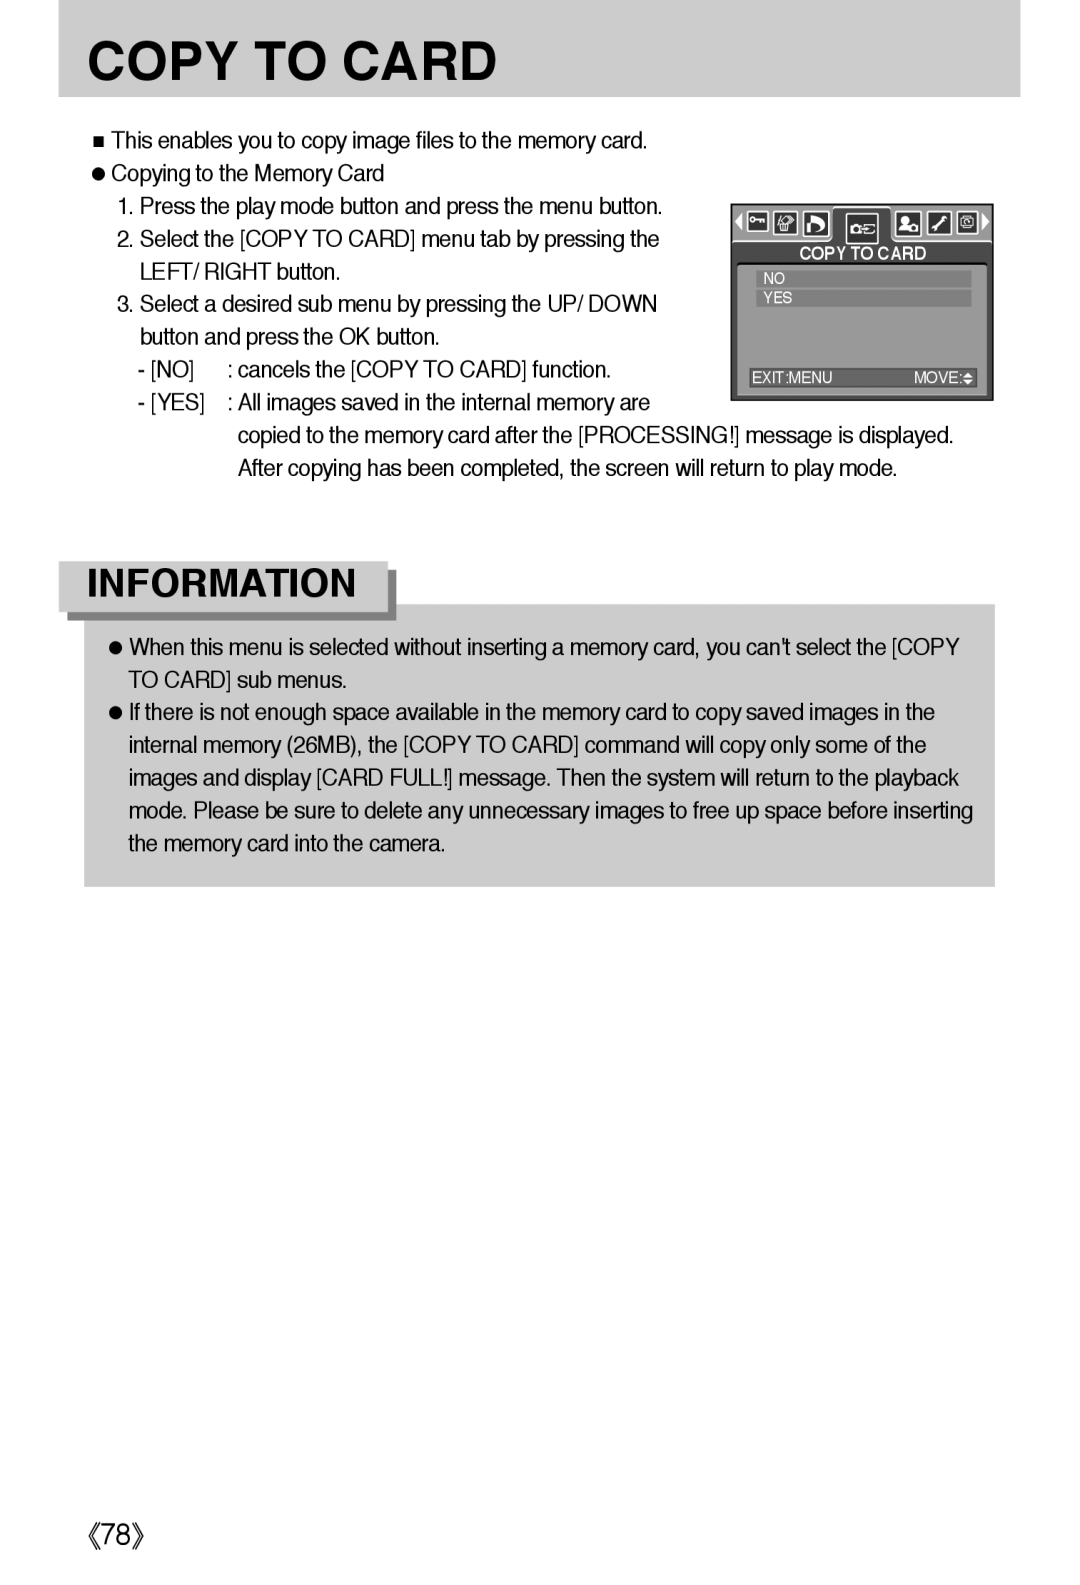 Samsung L50 user manual Copy To Card, 《78》, Information 